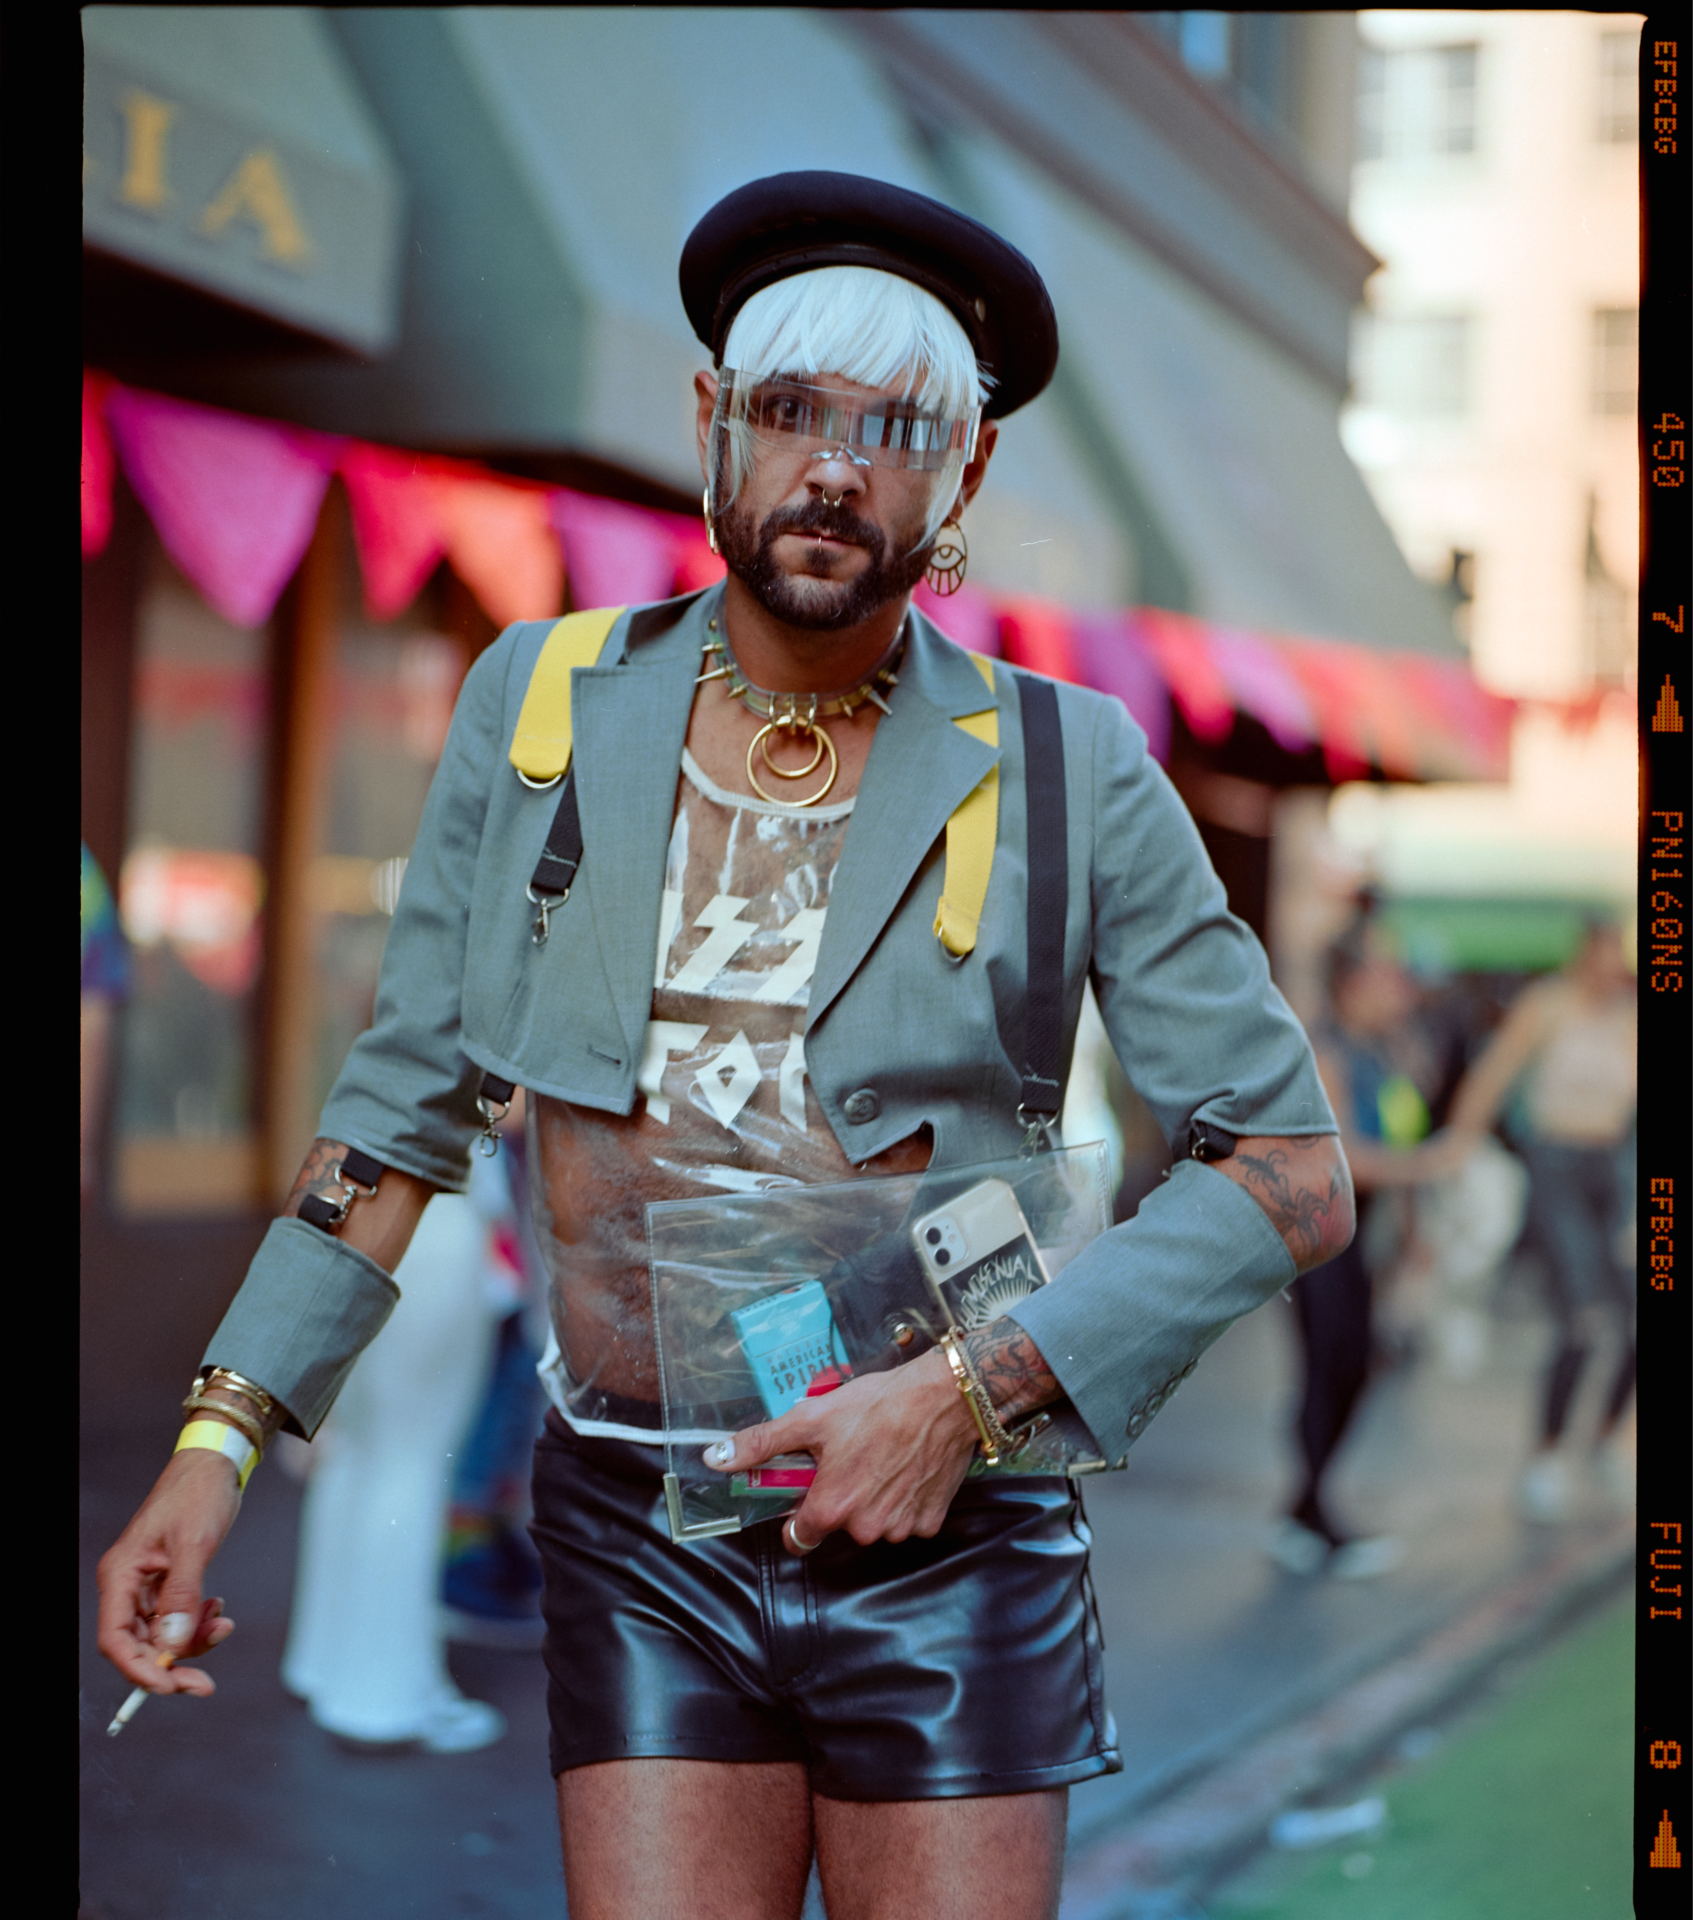 Photograph of Sergio wearing a cut up green blazer on top of a see-through plastic shirt and black leather shorts at the How Weird Street Faire